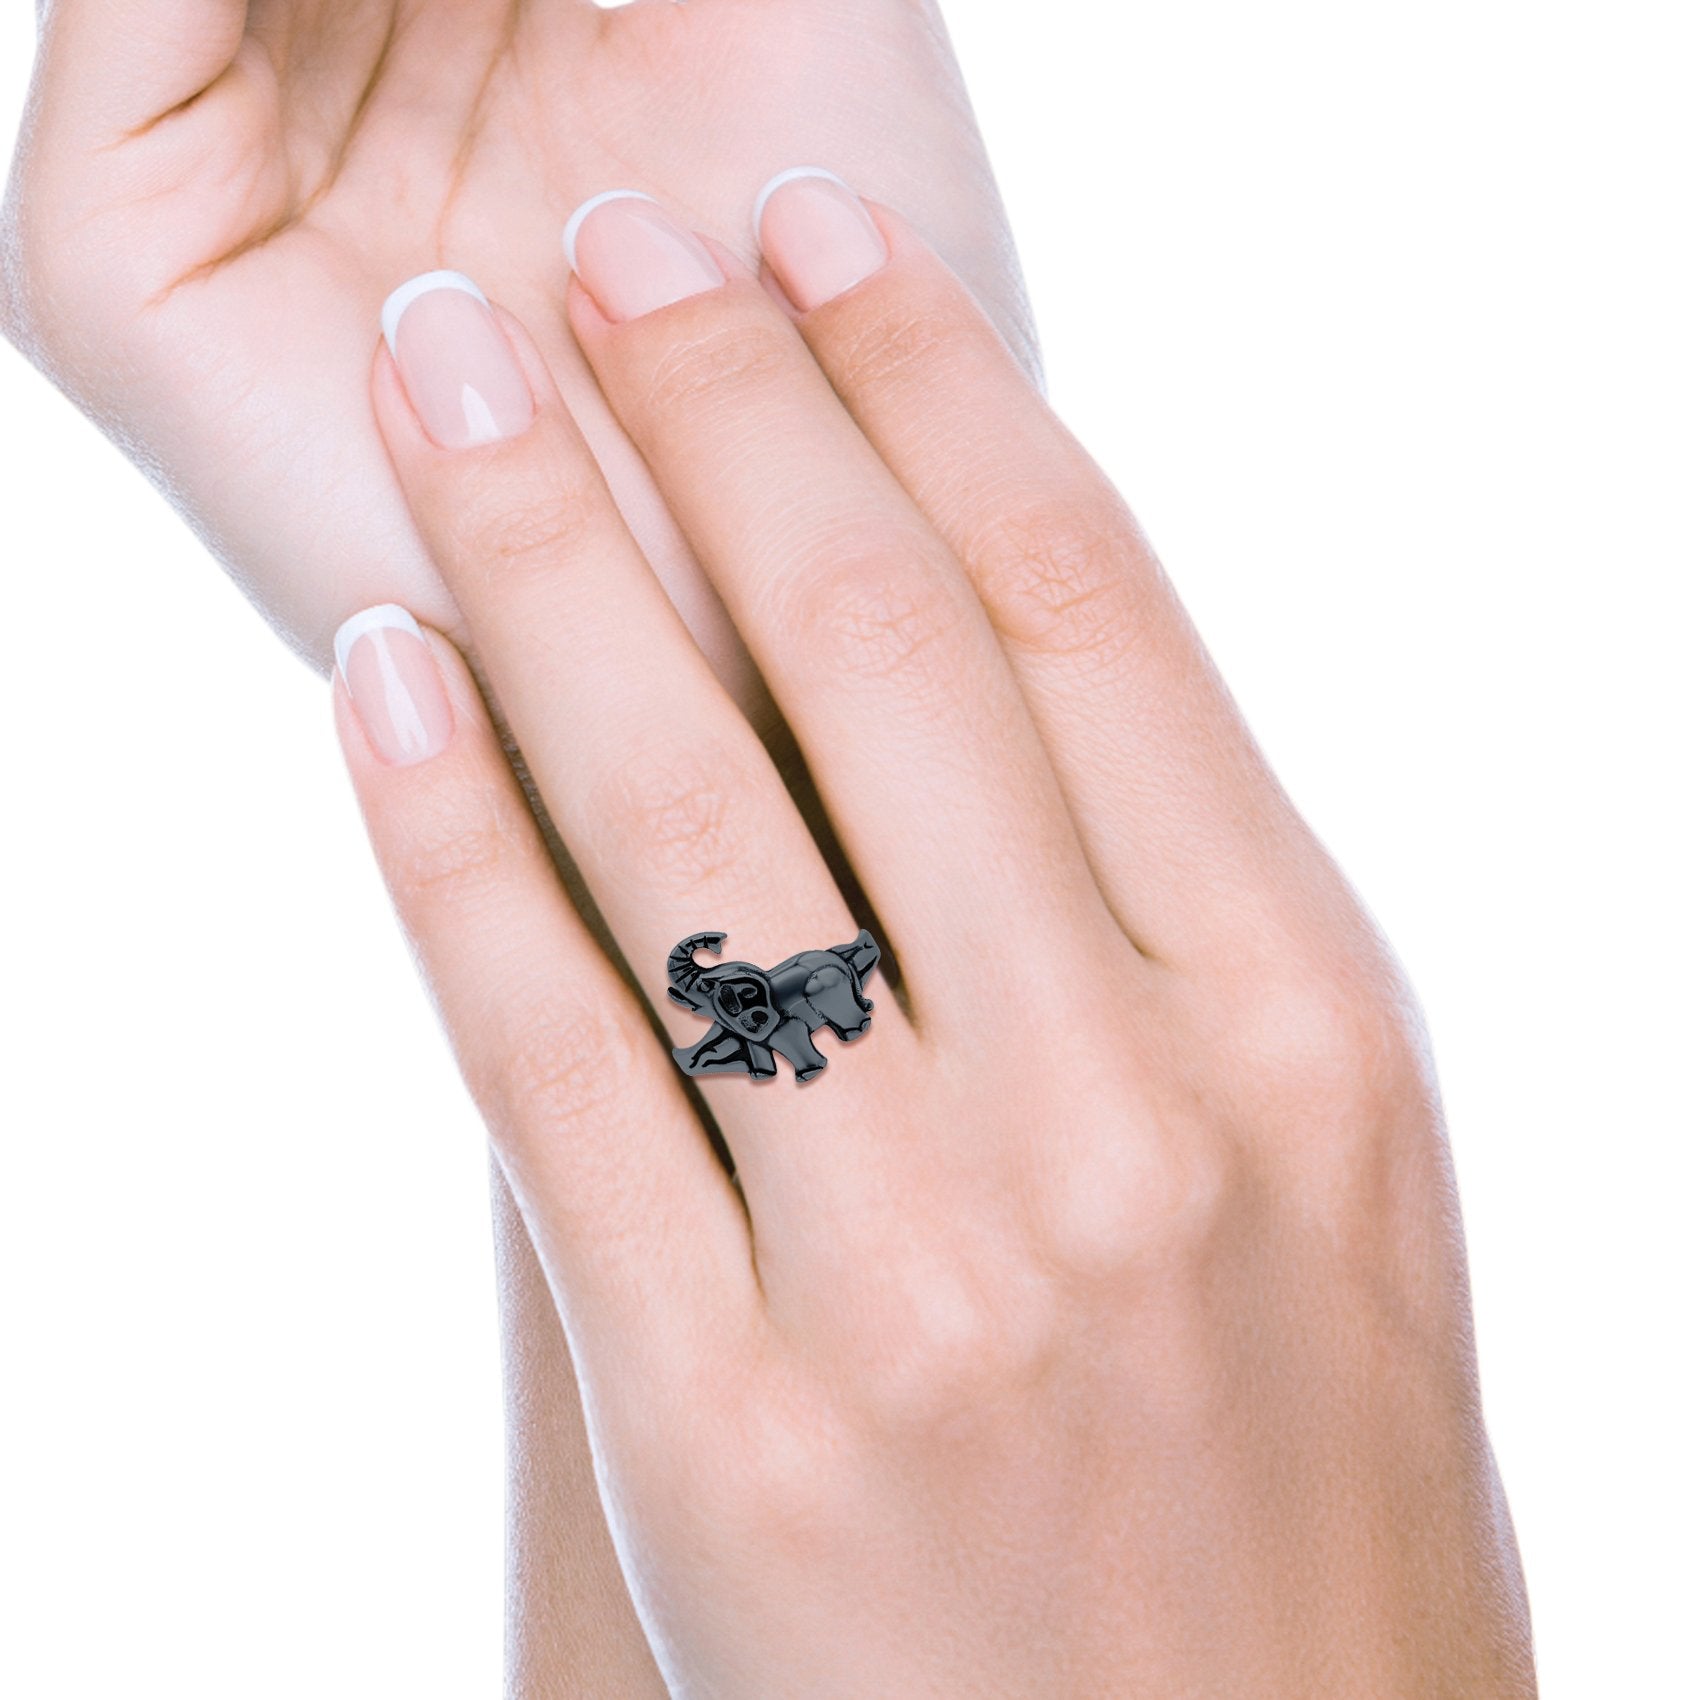 Elephant Ring Oxidized Band Solid 925 Sterling Silver Thumb Ring (14mm)